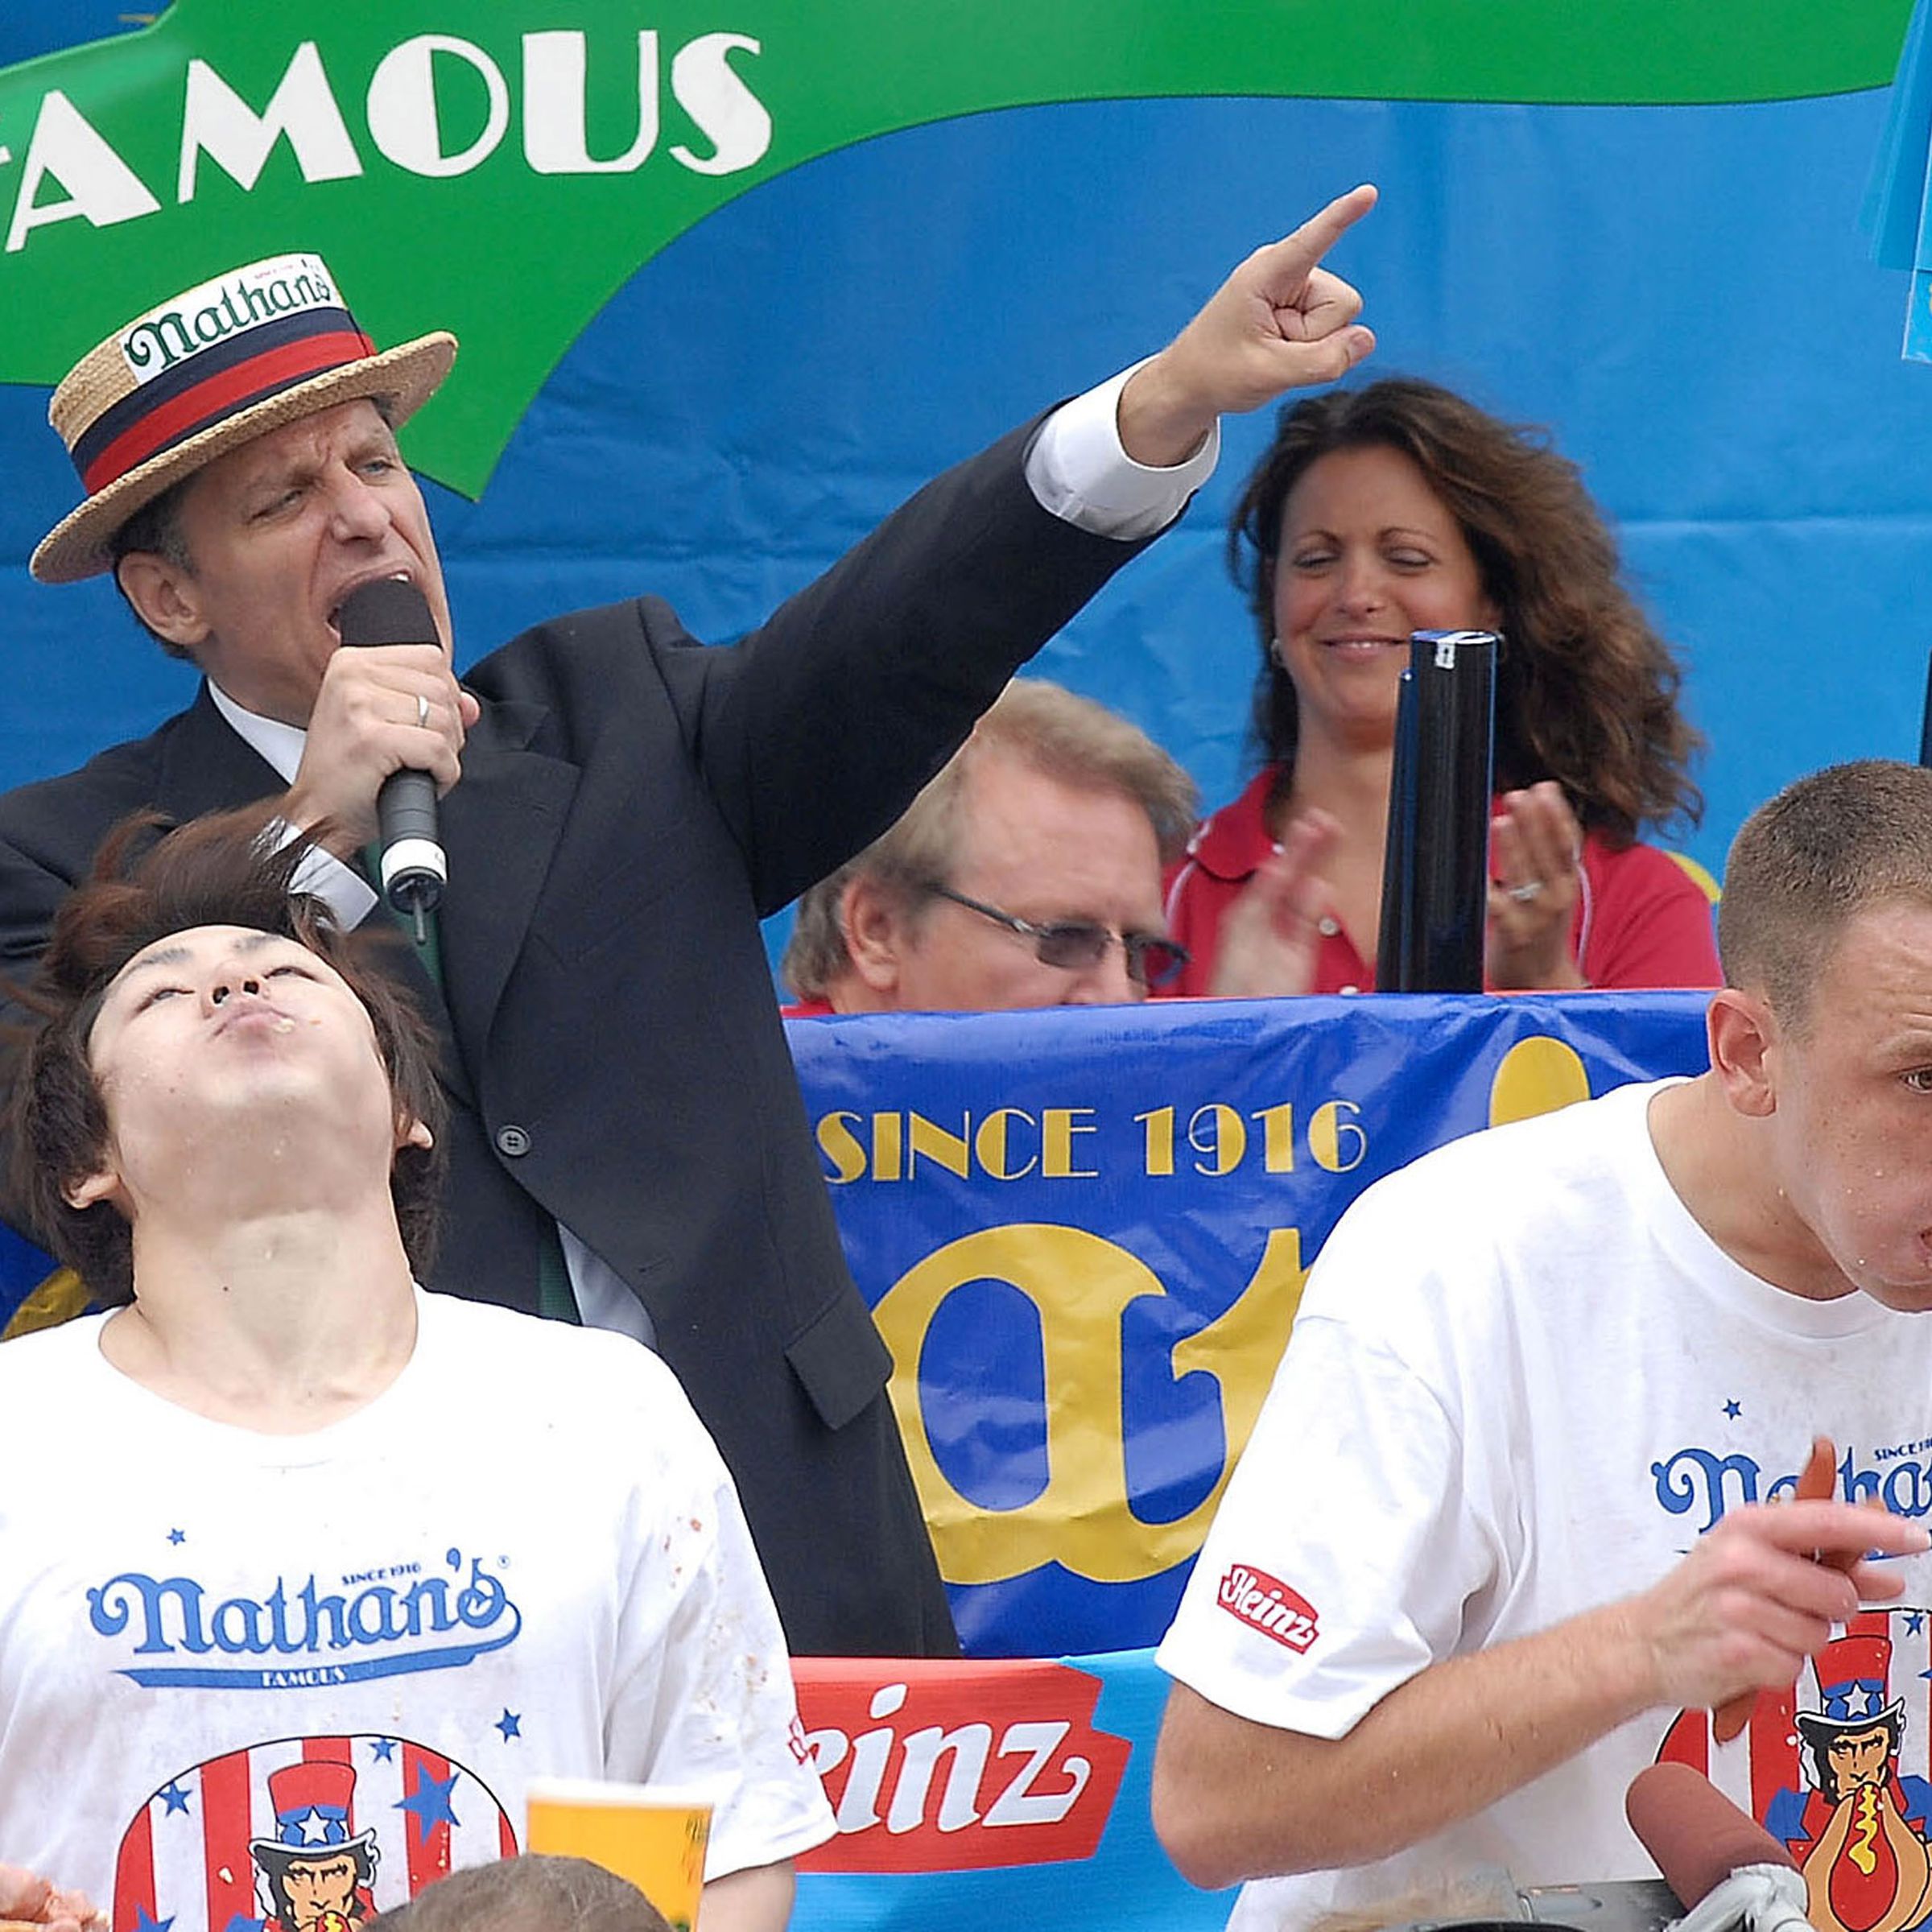 Takeru Kobayashi (L) and Joey Chestnut (R) competed during the 92nd Annual Nathan’s Famous International Hot Dog Eating Contest in 2007.